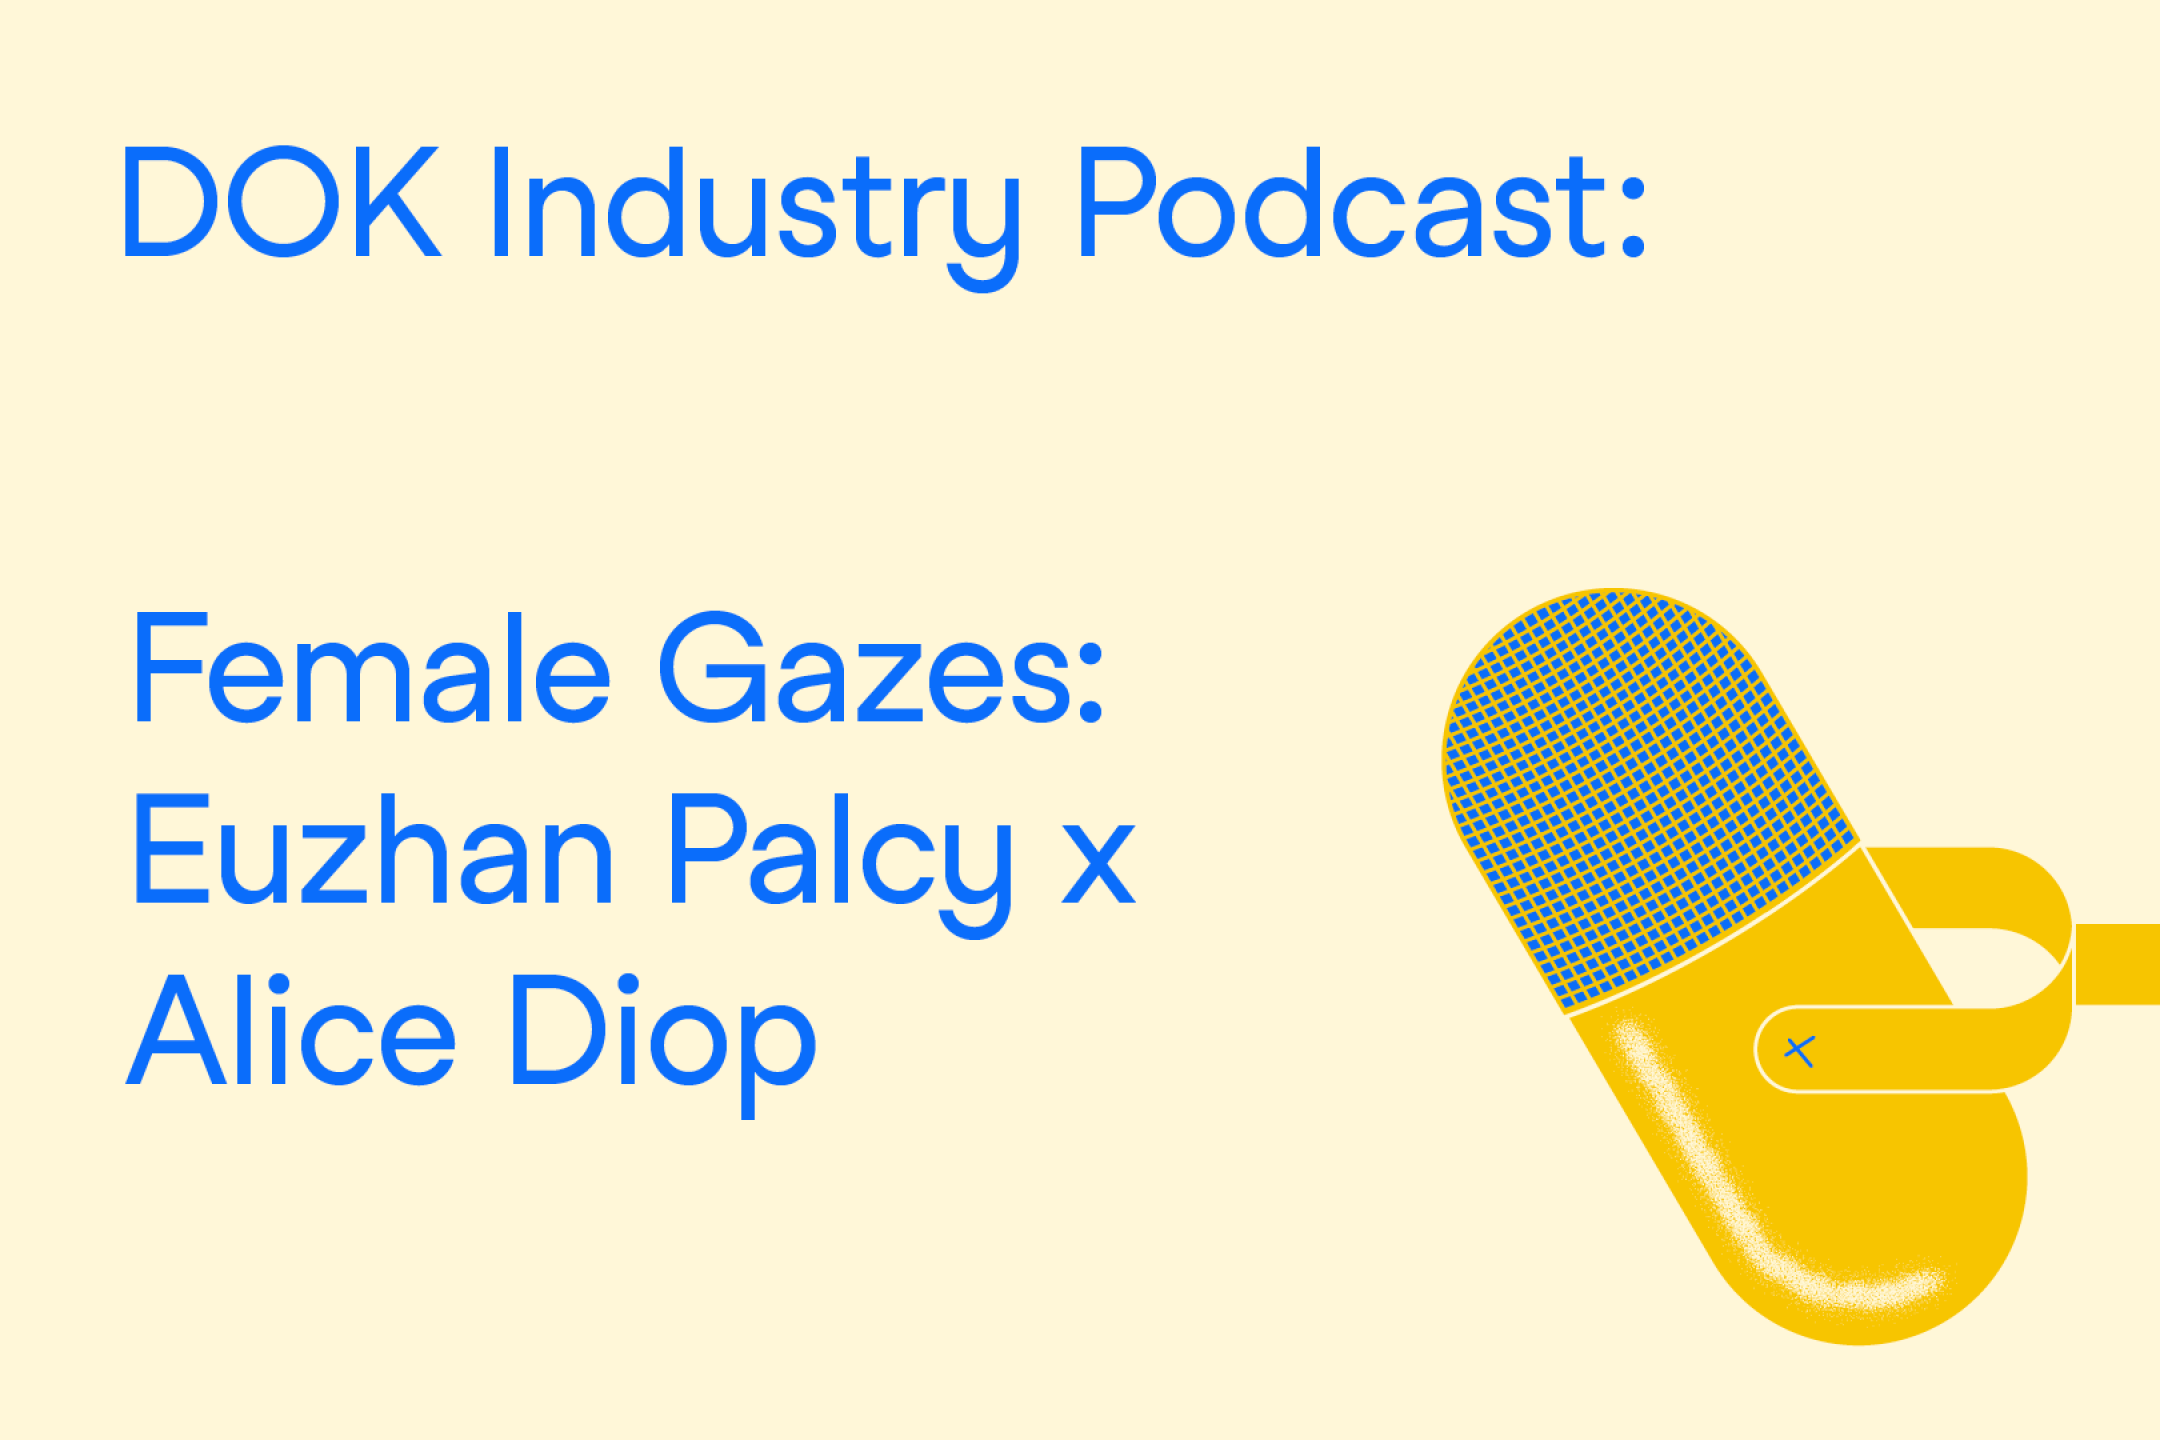 A text graphic with blue letters on a yellow background. At the right the illustration of a microphone. At the left the text: "DOK Industry Podcast: Female Gazes: Euzhan Palcy x Alice Diop”